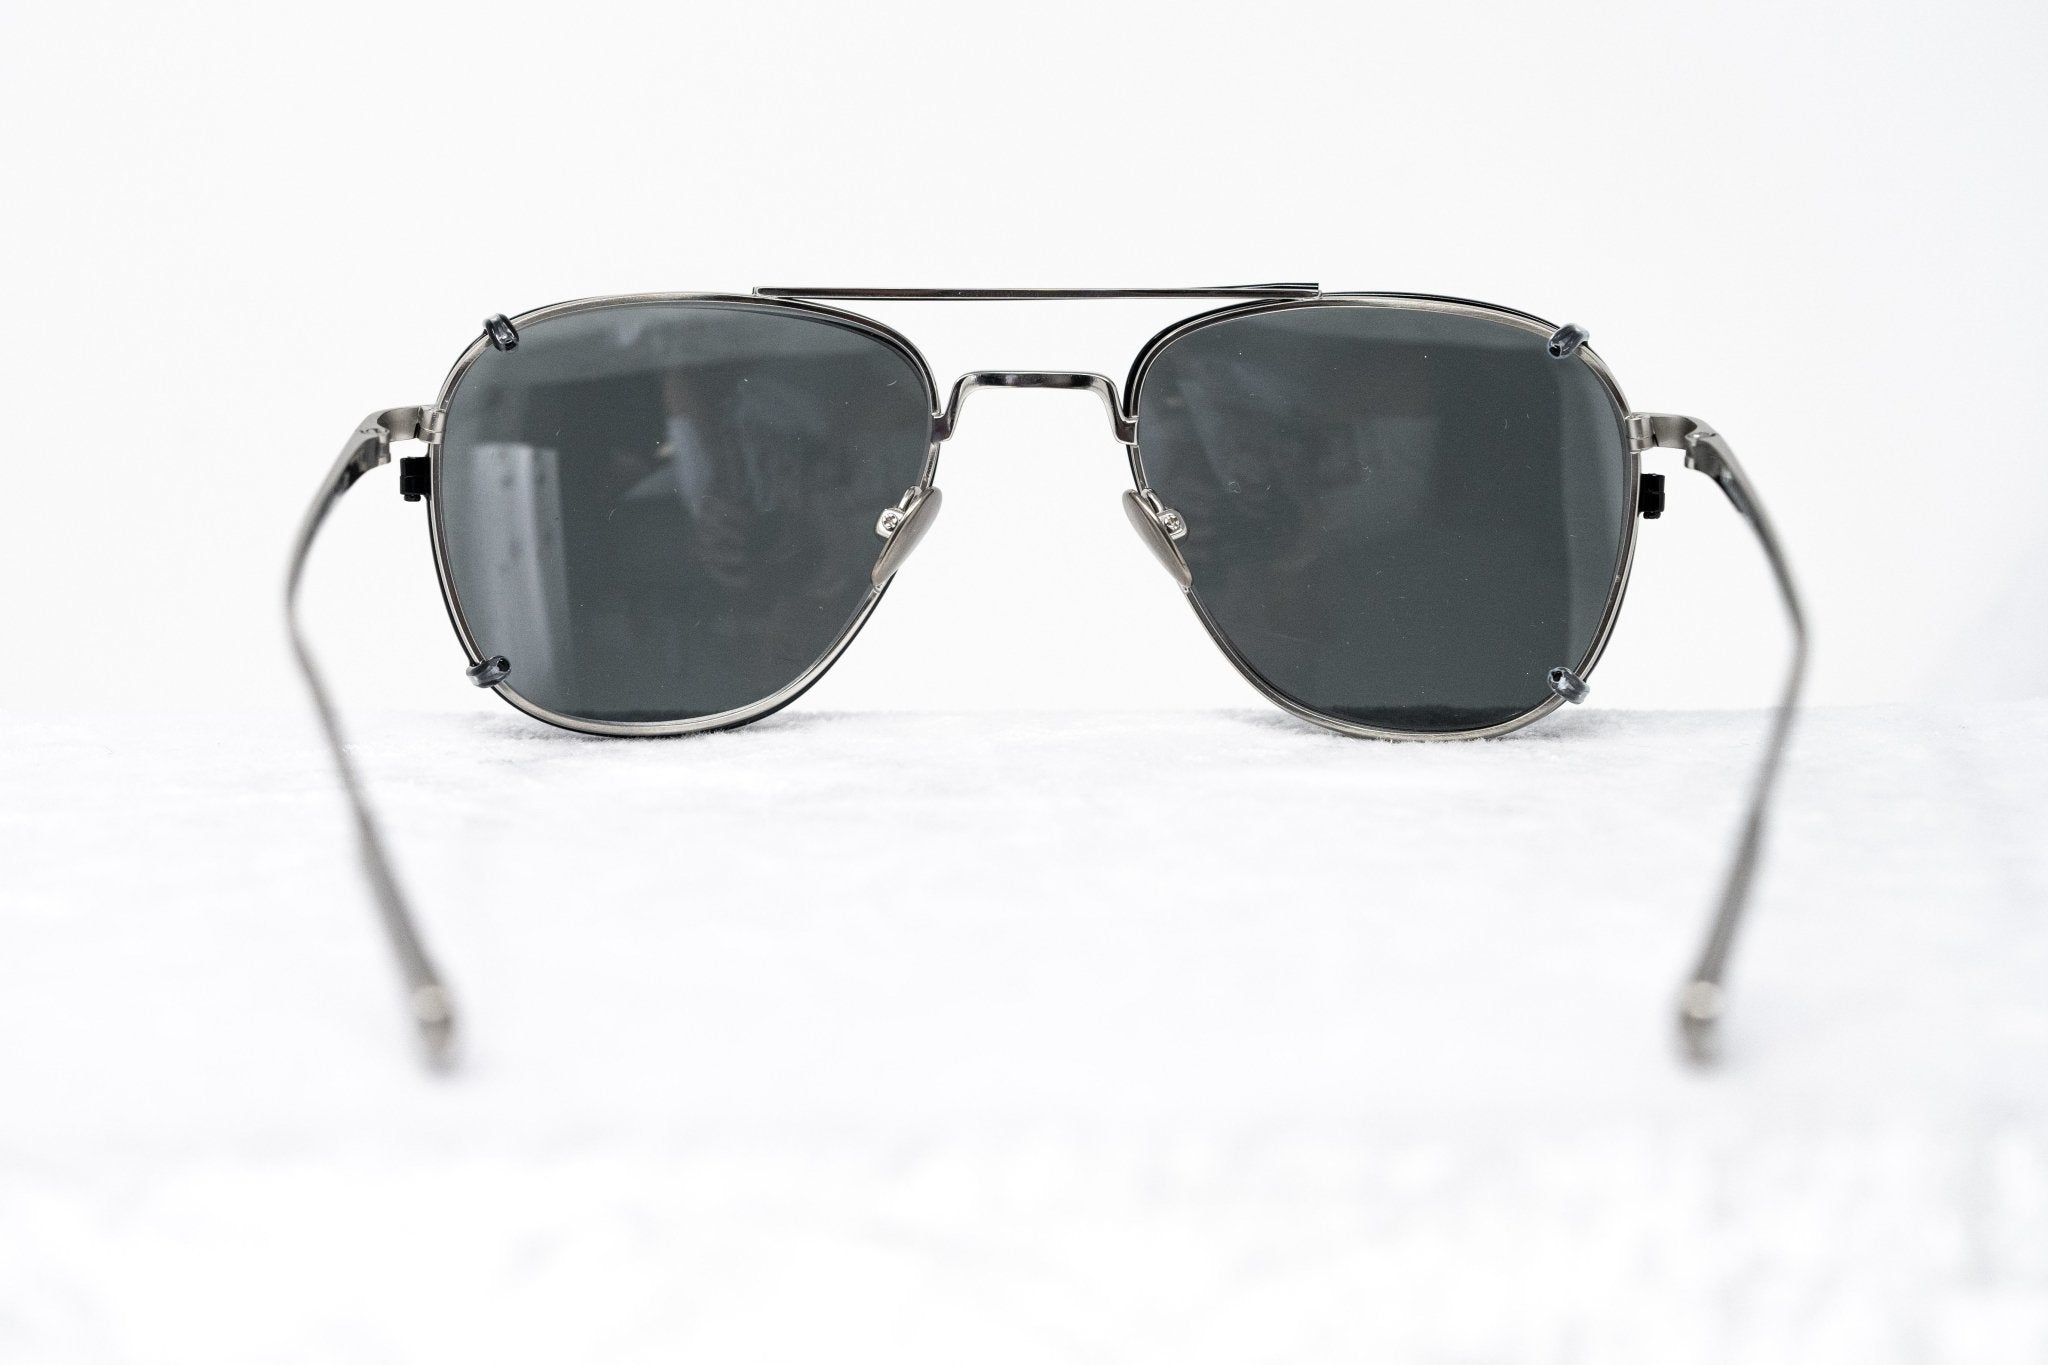 Kris Van Assche Sunglasses Unisex Titanium Brushed Silver Black Clip-On with Grey Lenses Category 3- KVA92C5SUN - Watches & Crystals